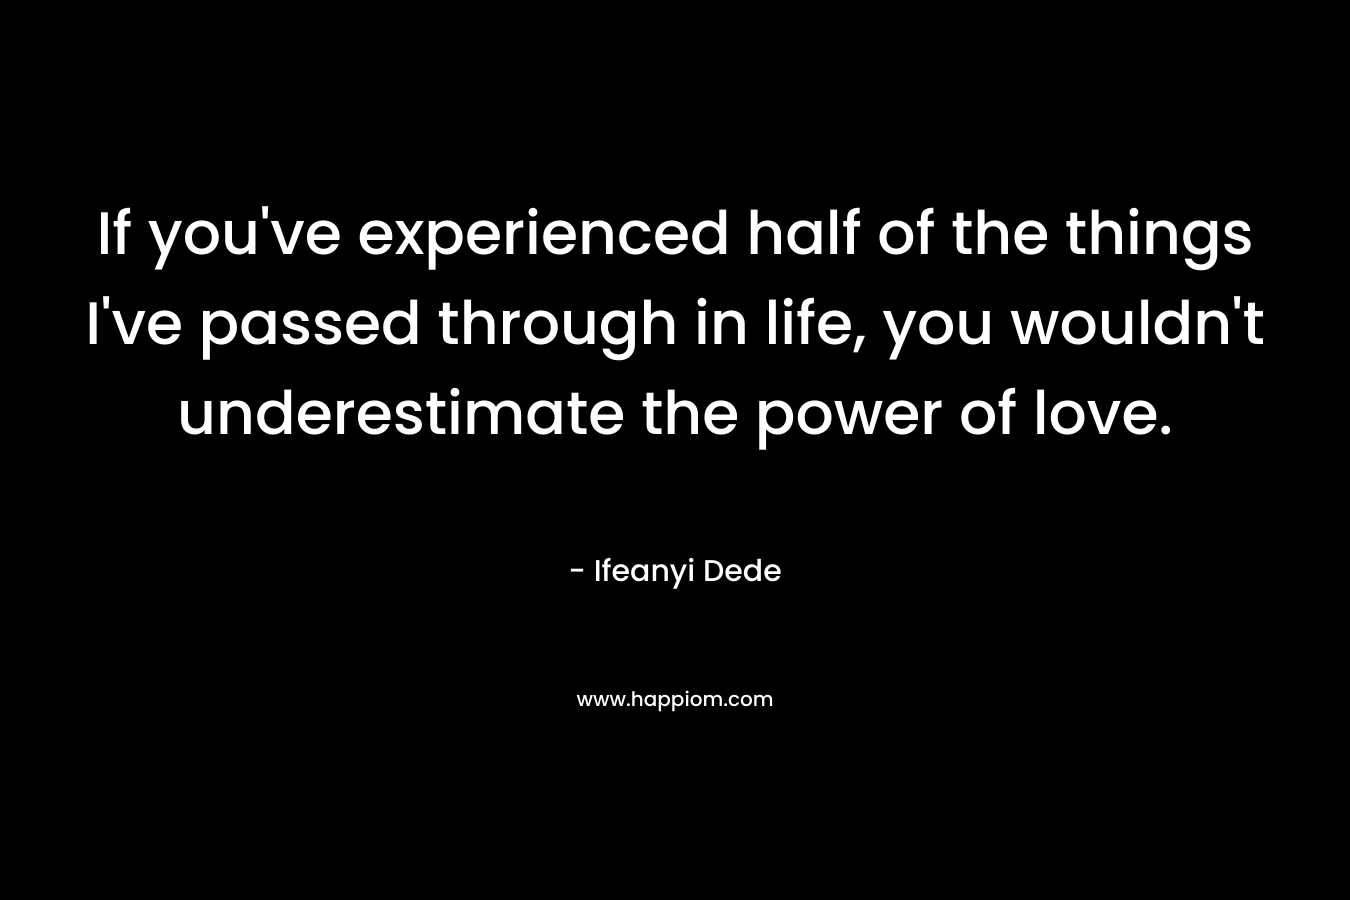 If you’ve experienced half of the things I’ve passed through in life, you wouldn’t underestimate the power of love. – Ifeanyi Dede